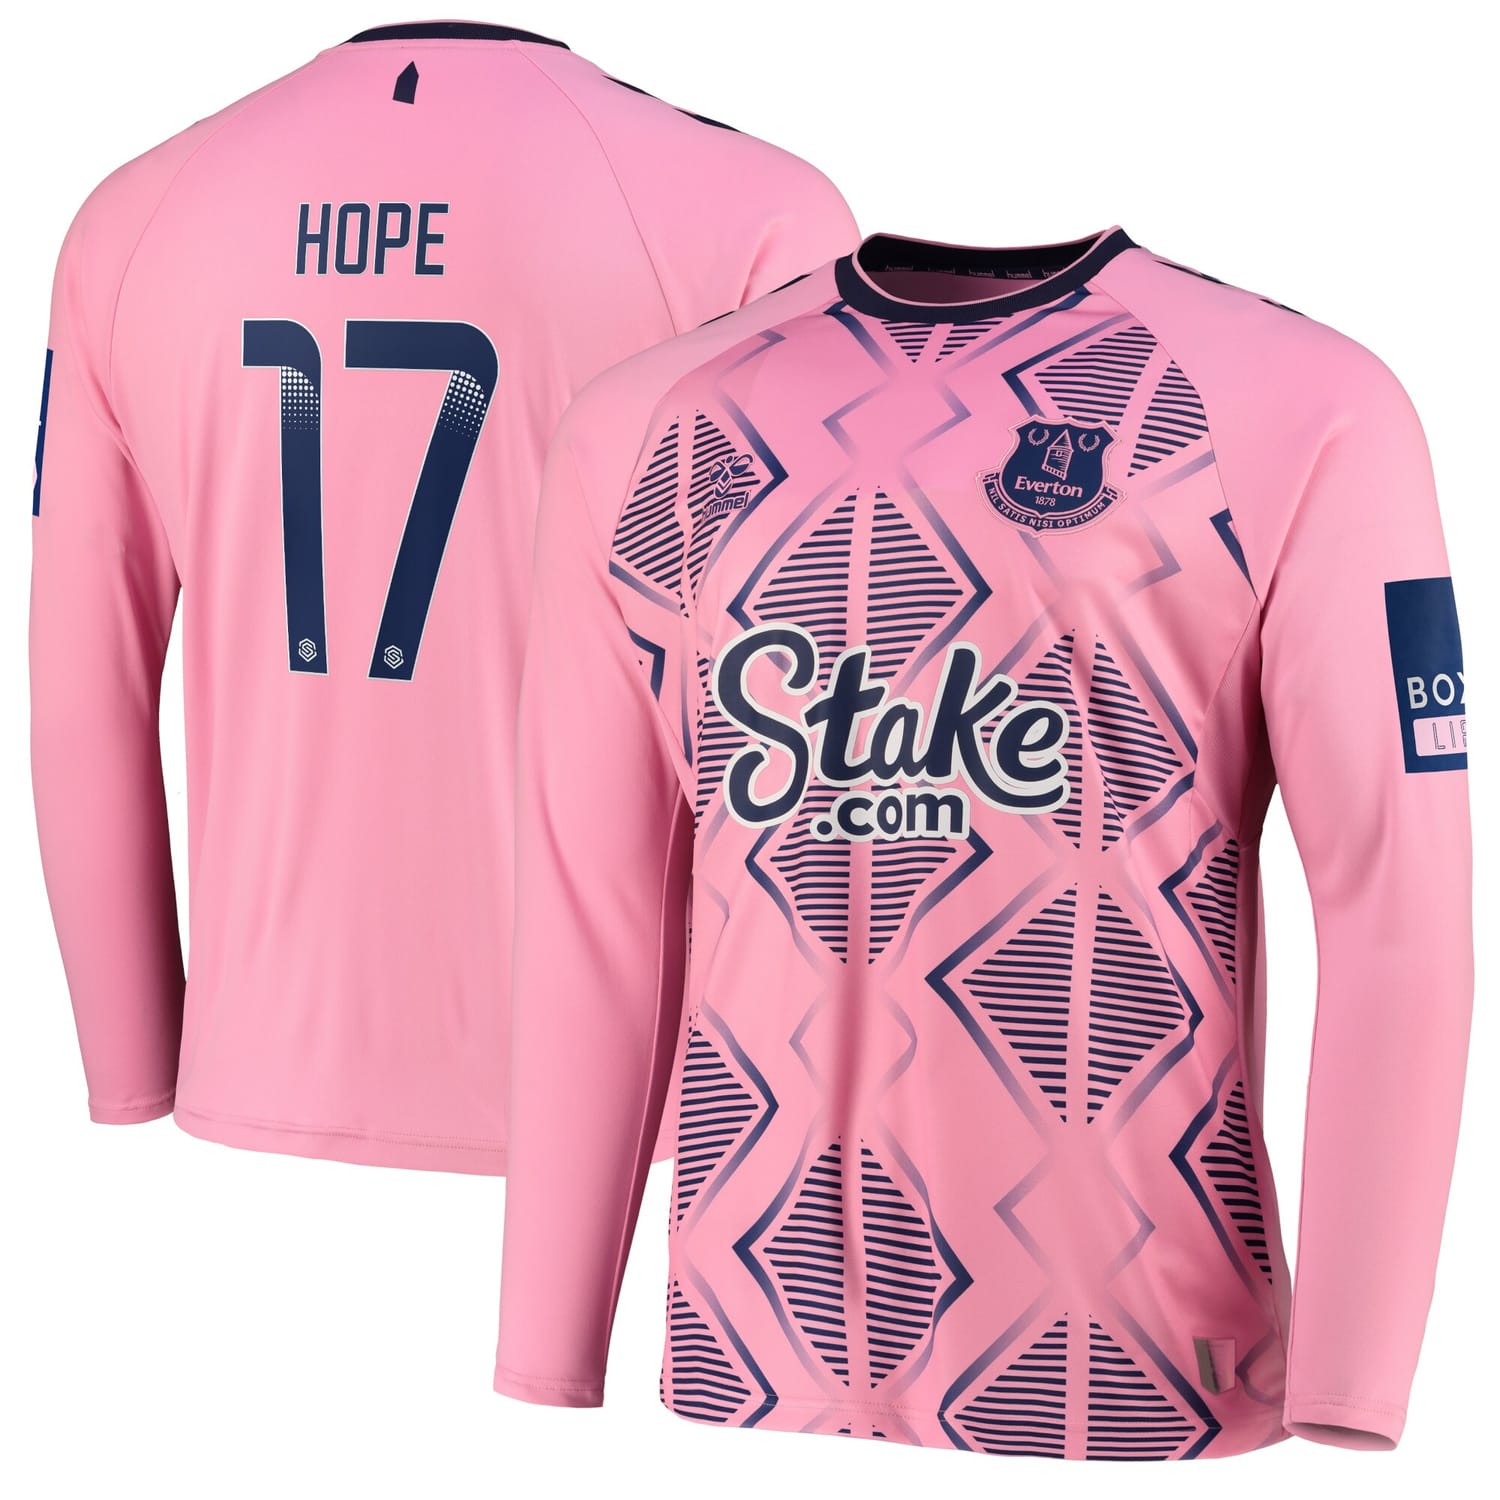 Premier League Everton Away WSL Jersey Shirt Long Sleeve 2022-23 player Lucy Hope 17 printing for Men